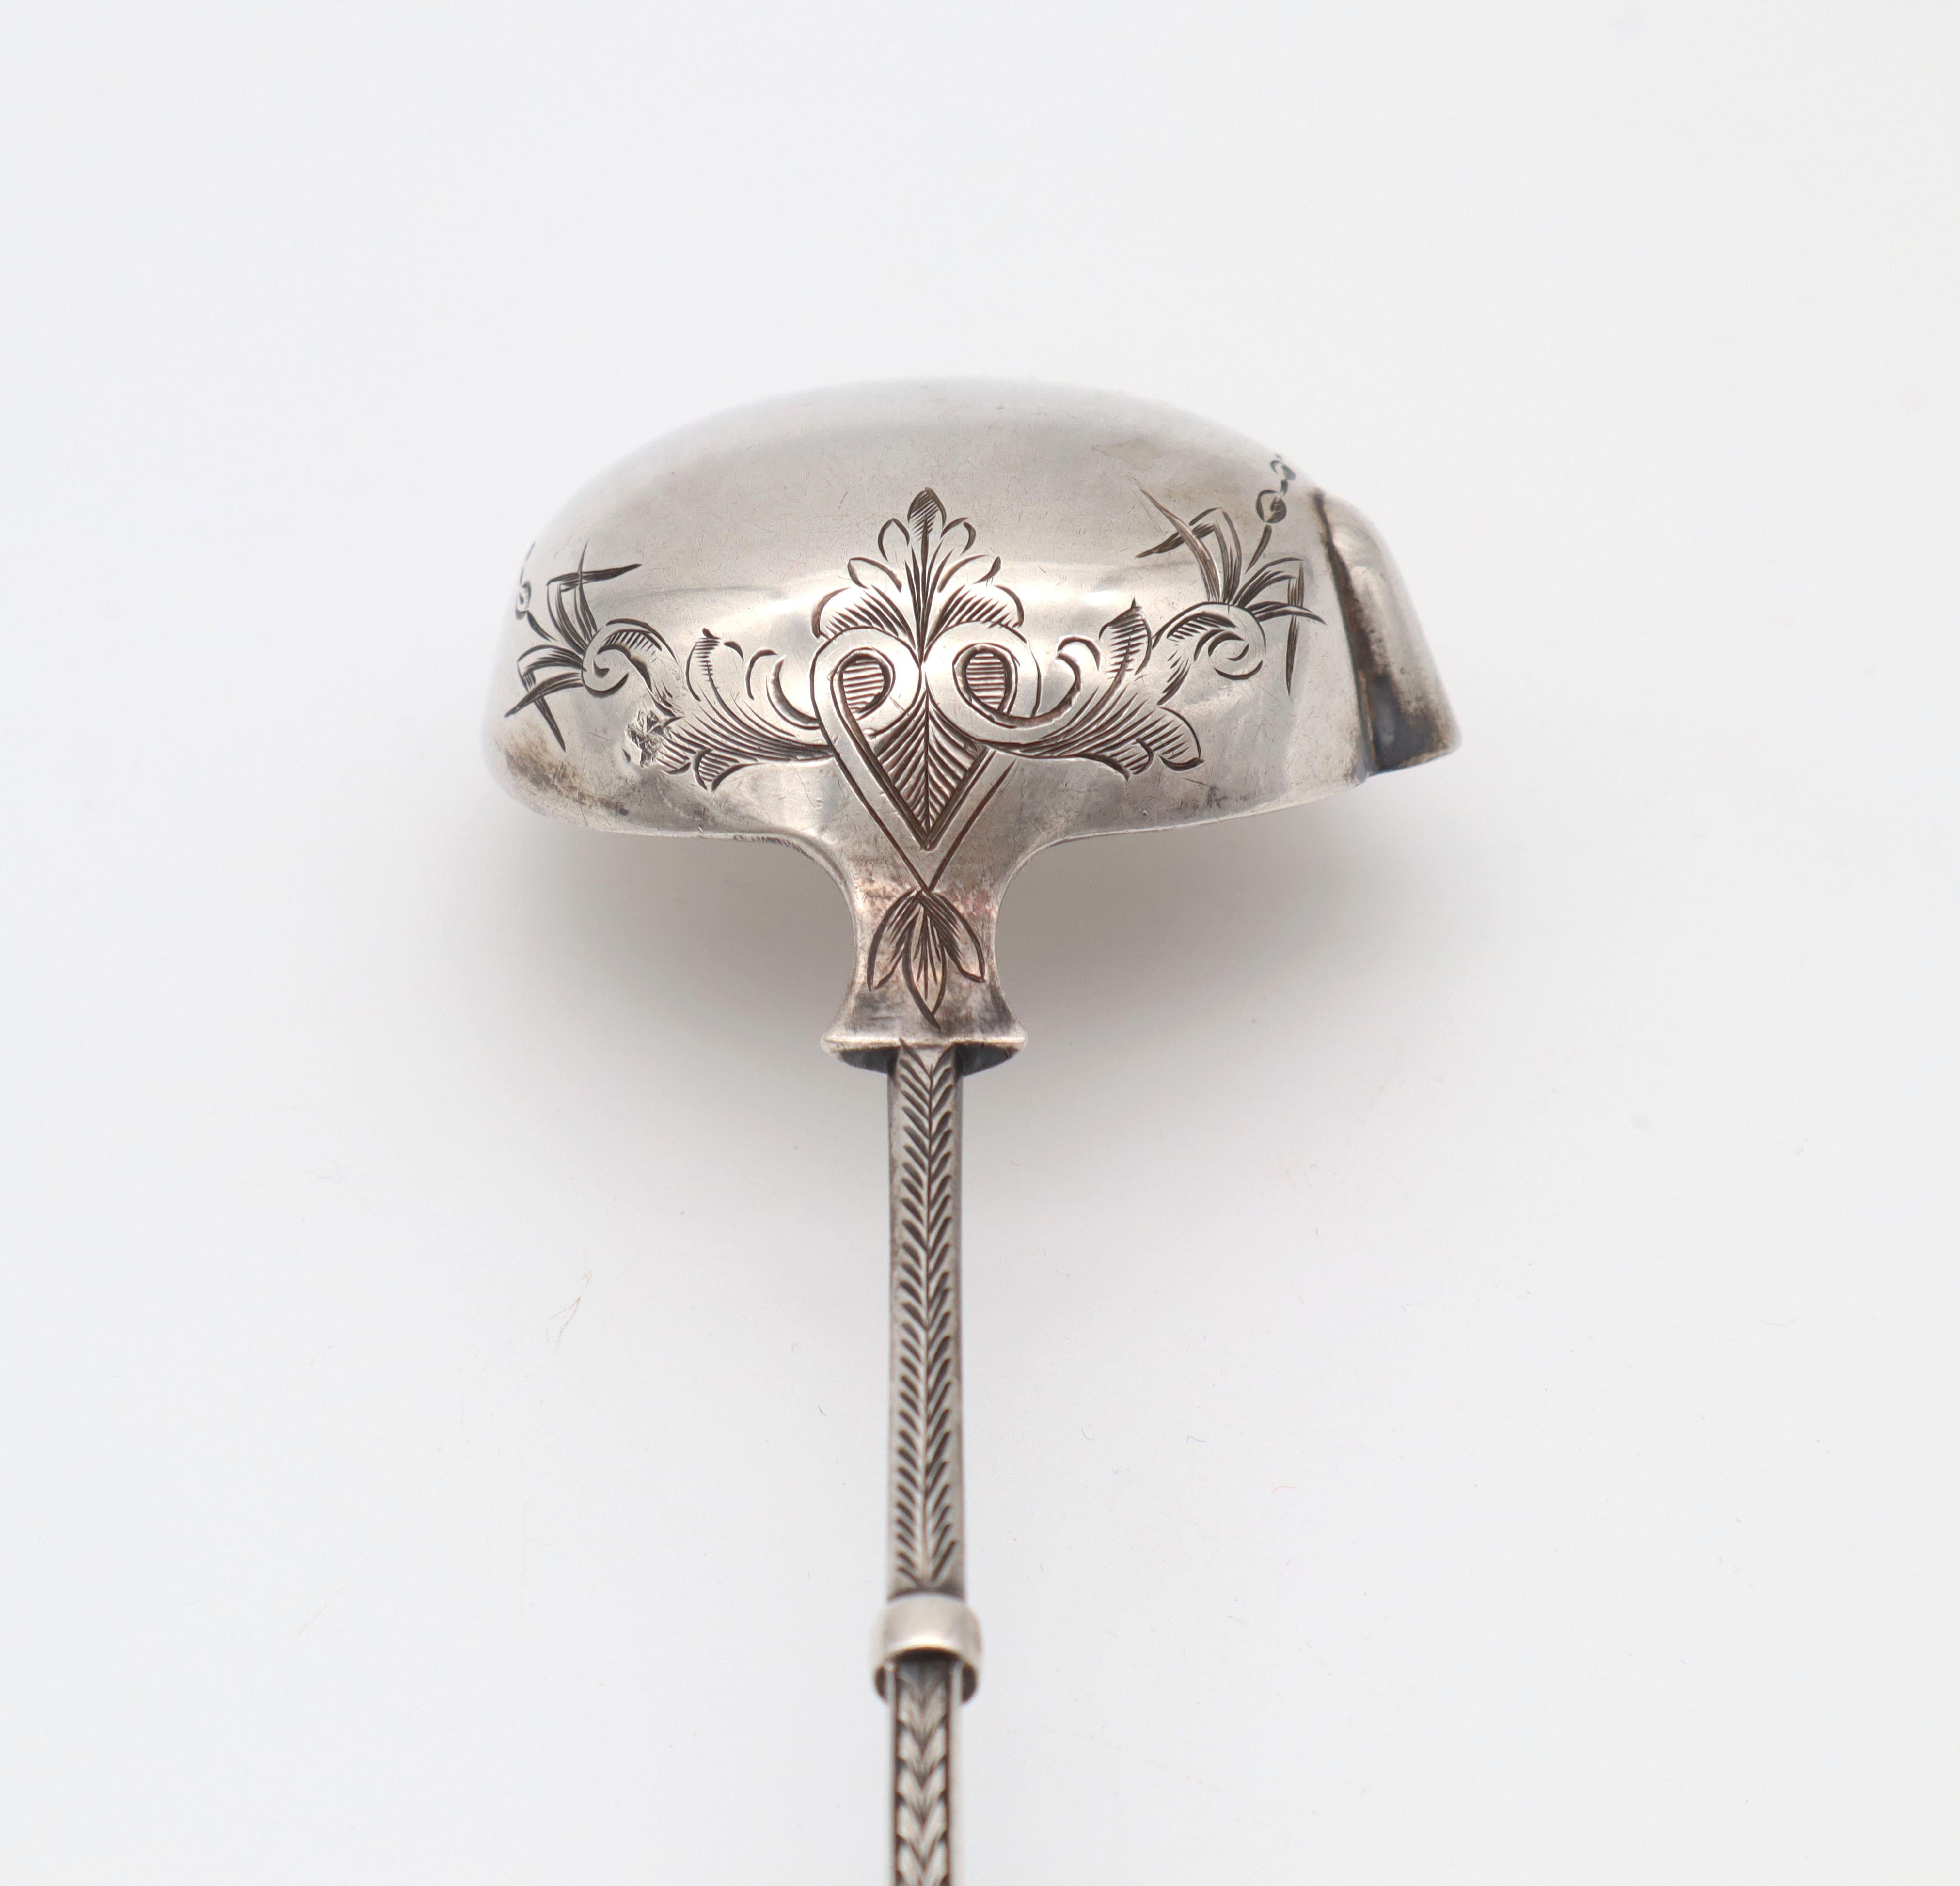 Exquisite large sterling silver souce or bowl ladle, sterling handle.
Excellent condition, stamped with the Minerva Hallmark and the Makers initials LP.
Solid and heavy piece ( 97 gr.). High Quality work of a French Secound Empire silversmith.